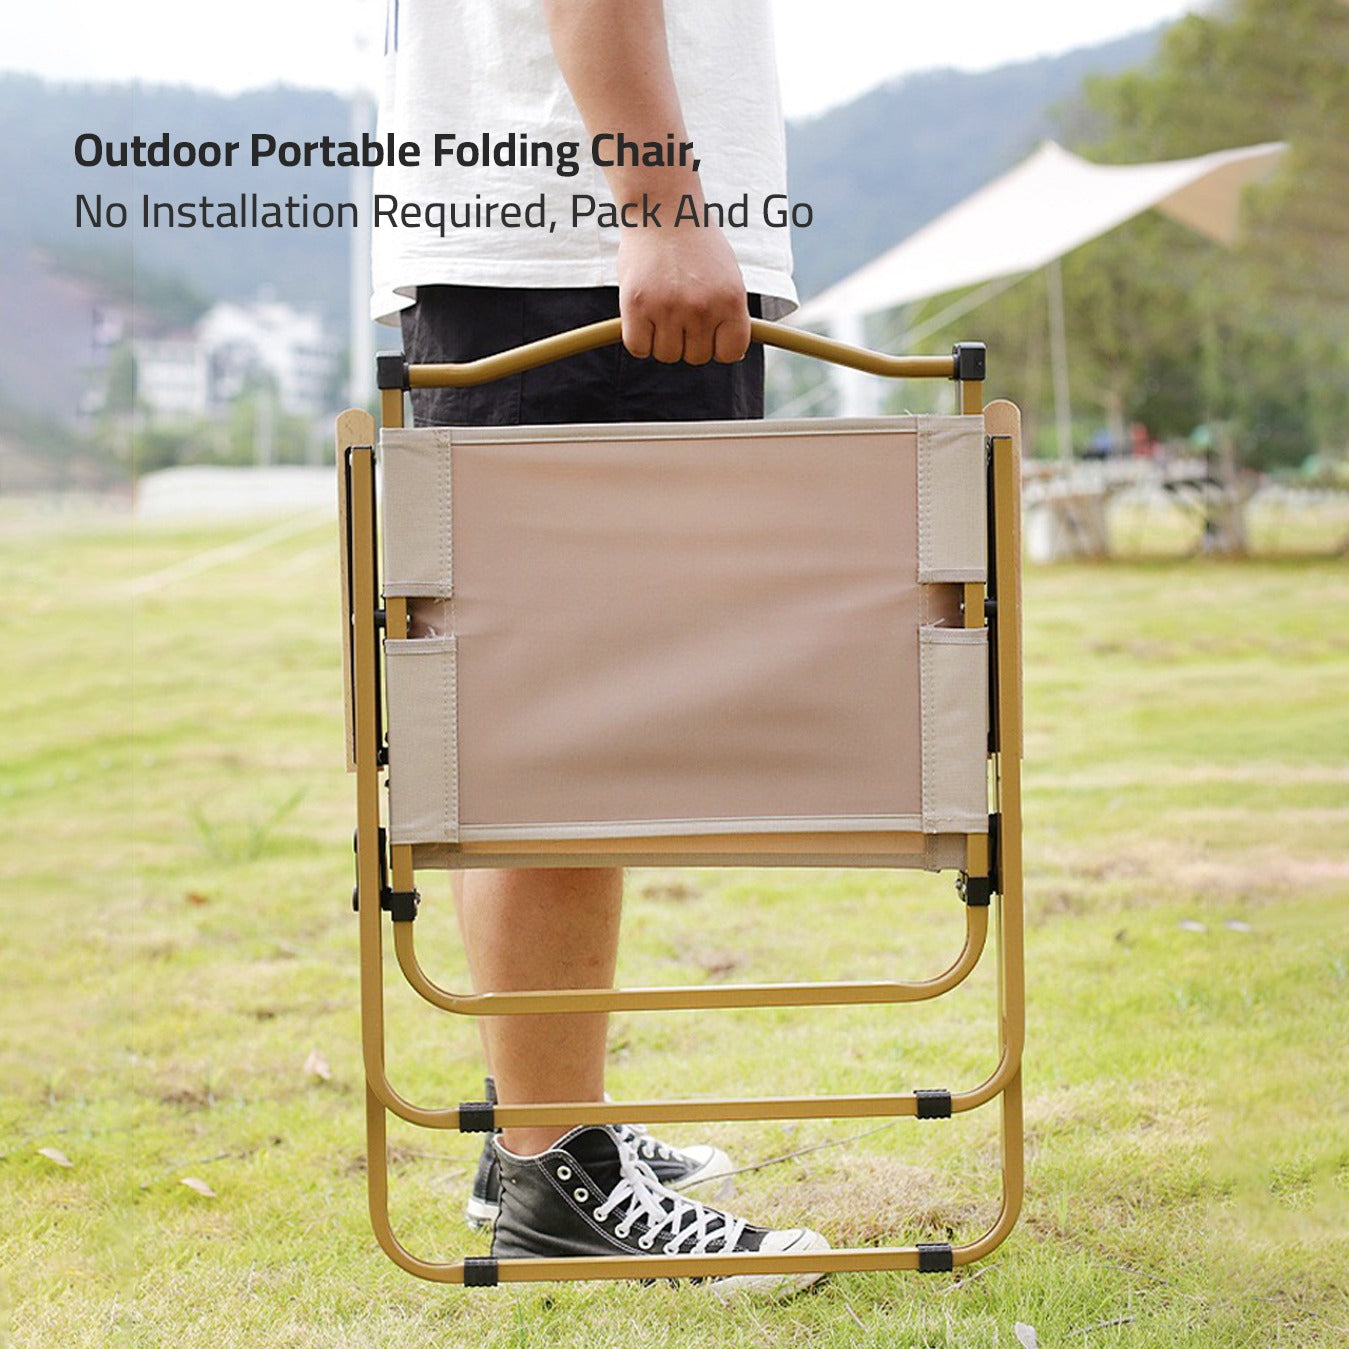 A person holding Outdoor Camping Folding Chair in a park to use for picnic